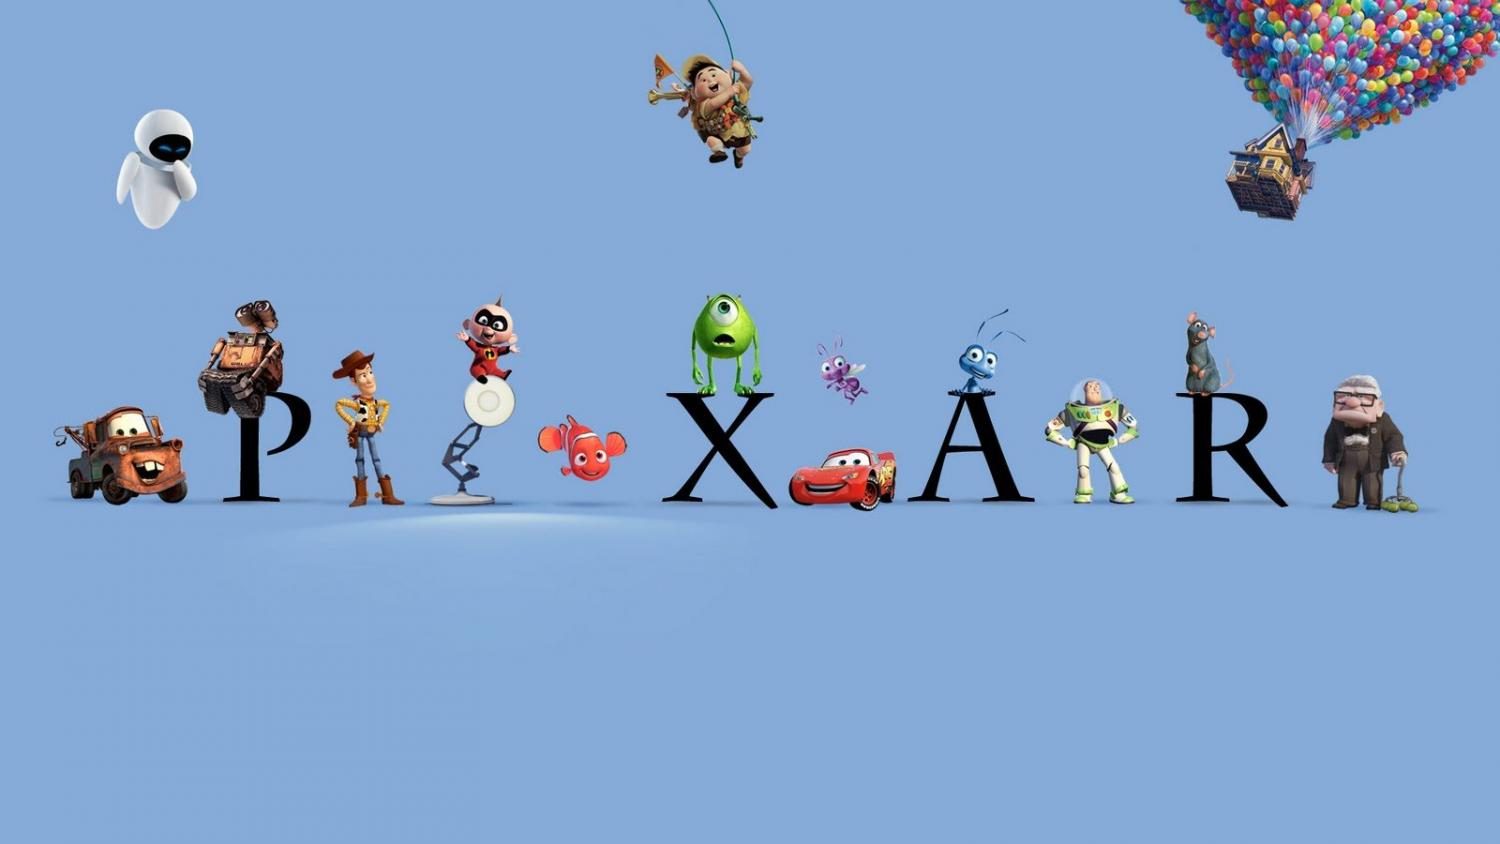 The+Pixar+theory+proves+Pixar+as+one+universe